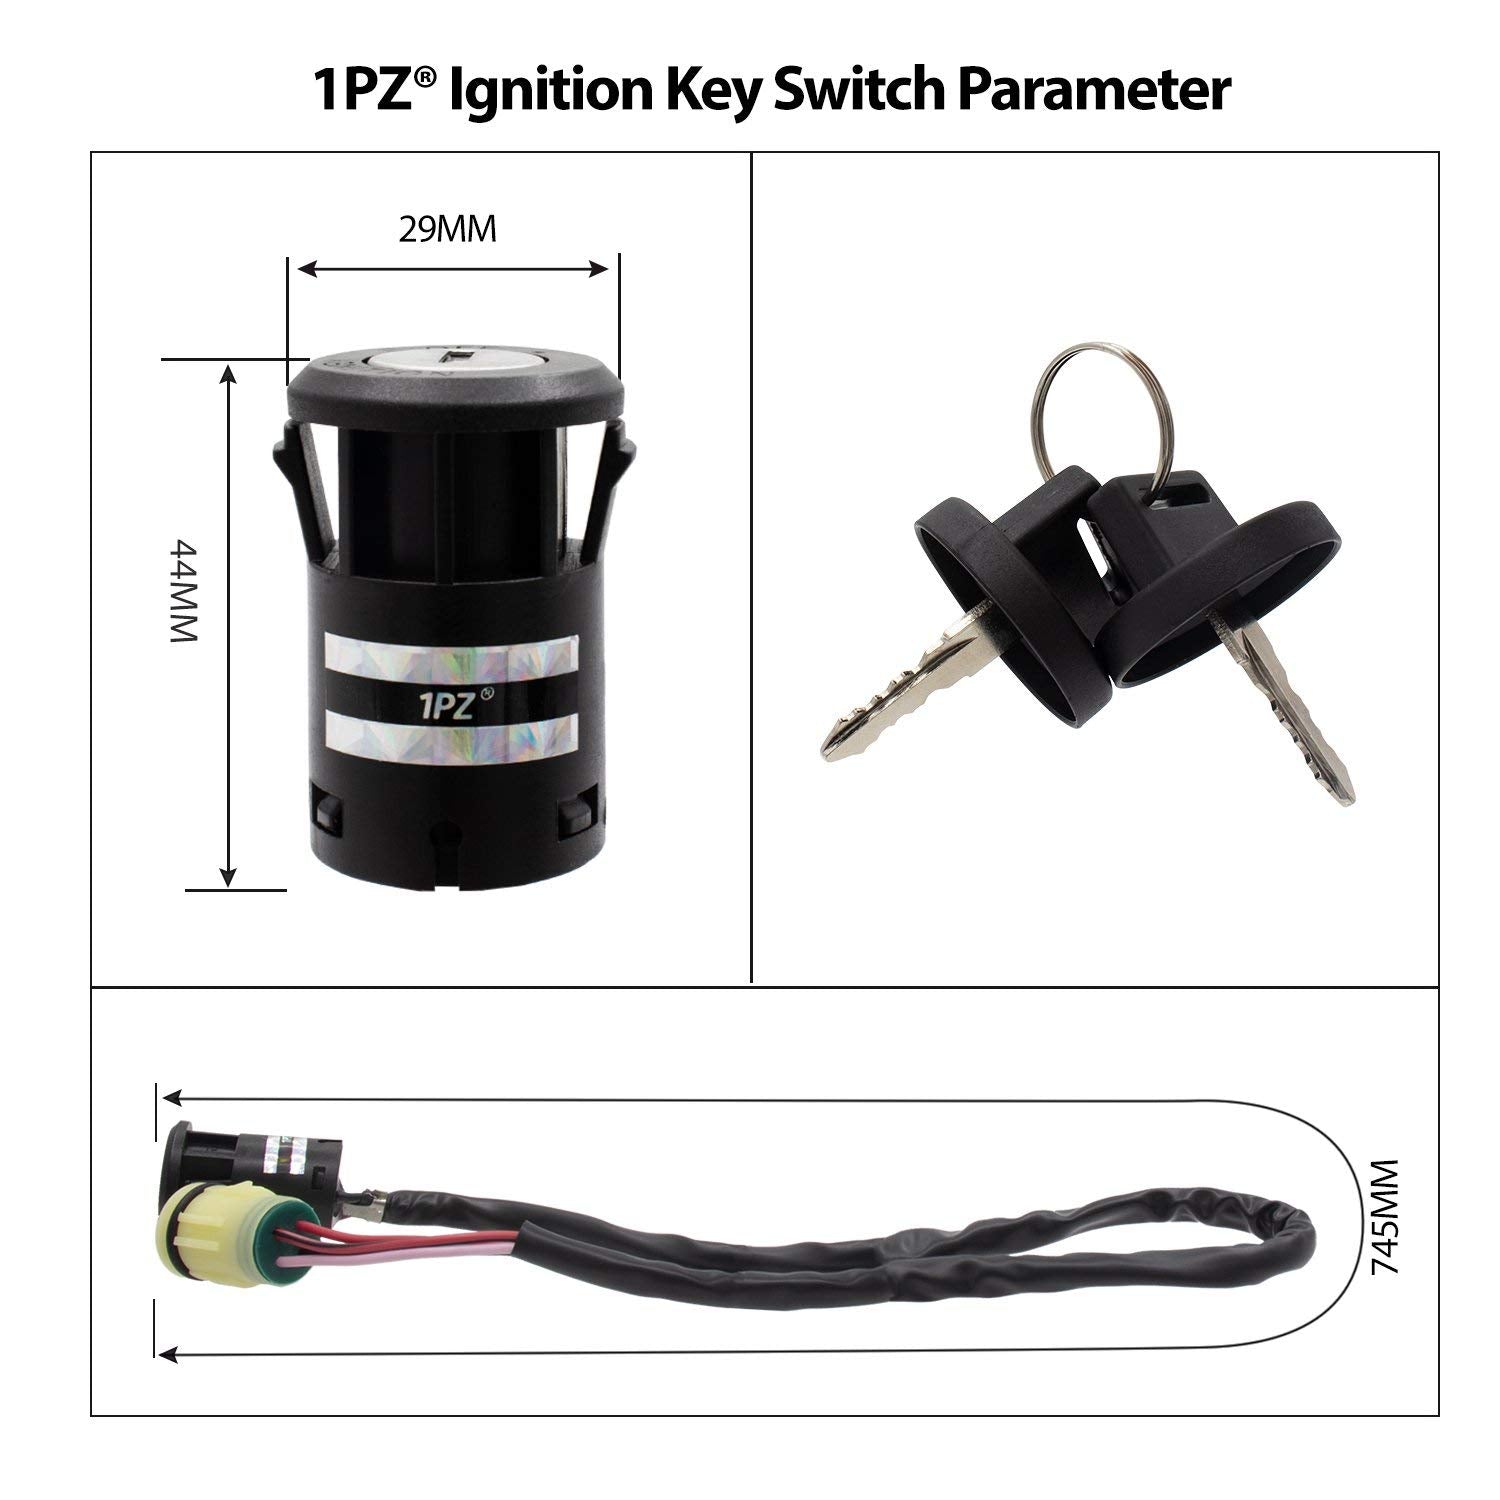 1PZ Ignition Key Switch Replacement for Honda ATV TRX420 Rancher 420 2007-2021